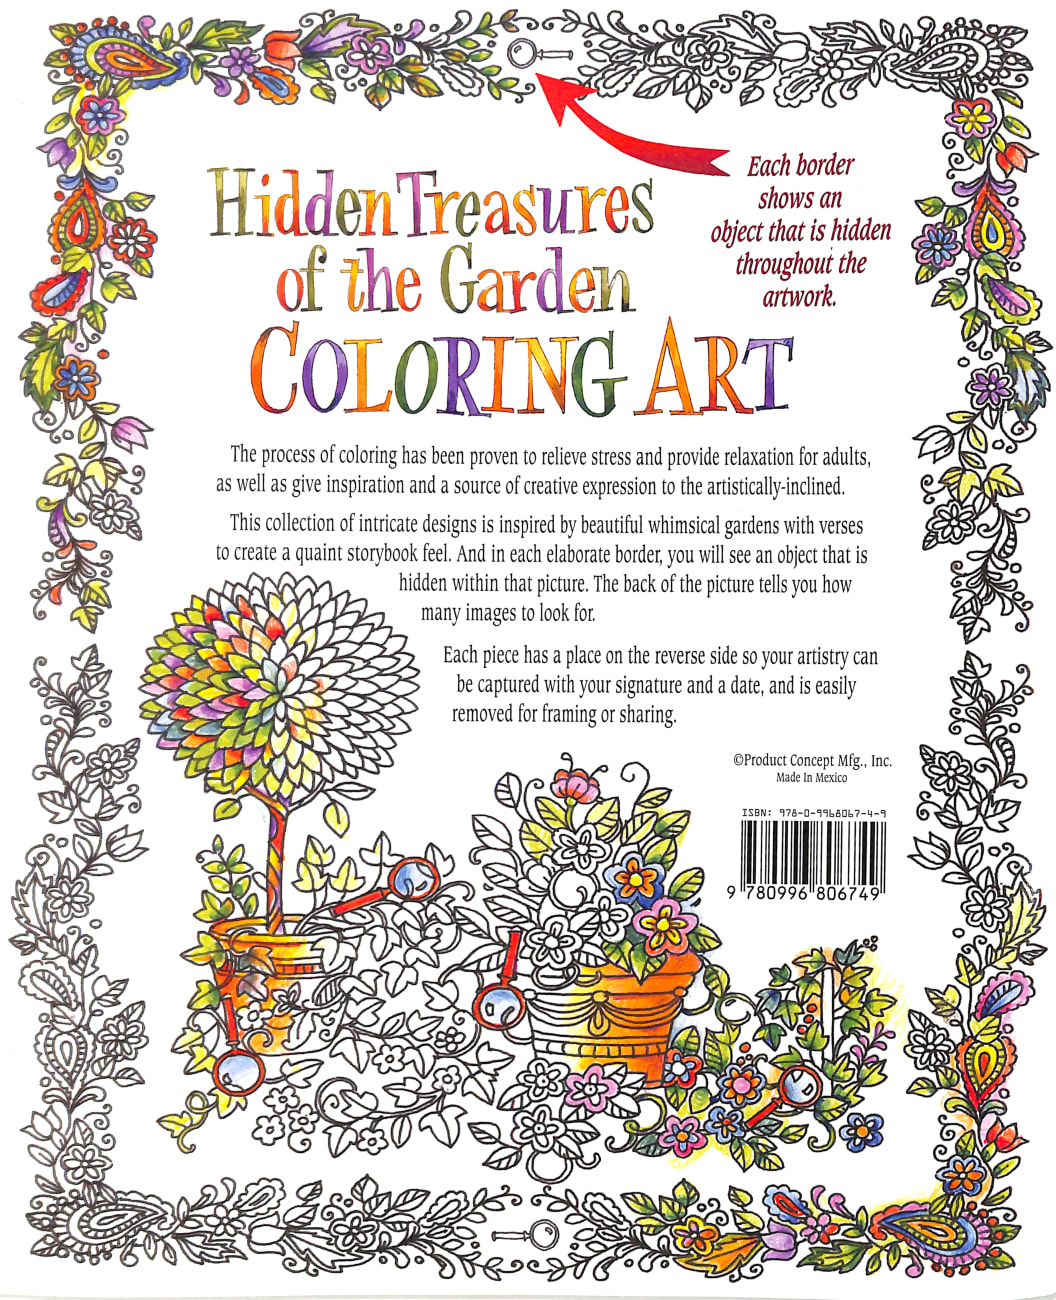 Hidden Treasures From the Garden (Adult Coloring Books Series) Paperback